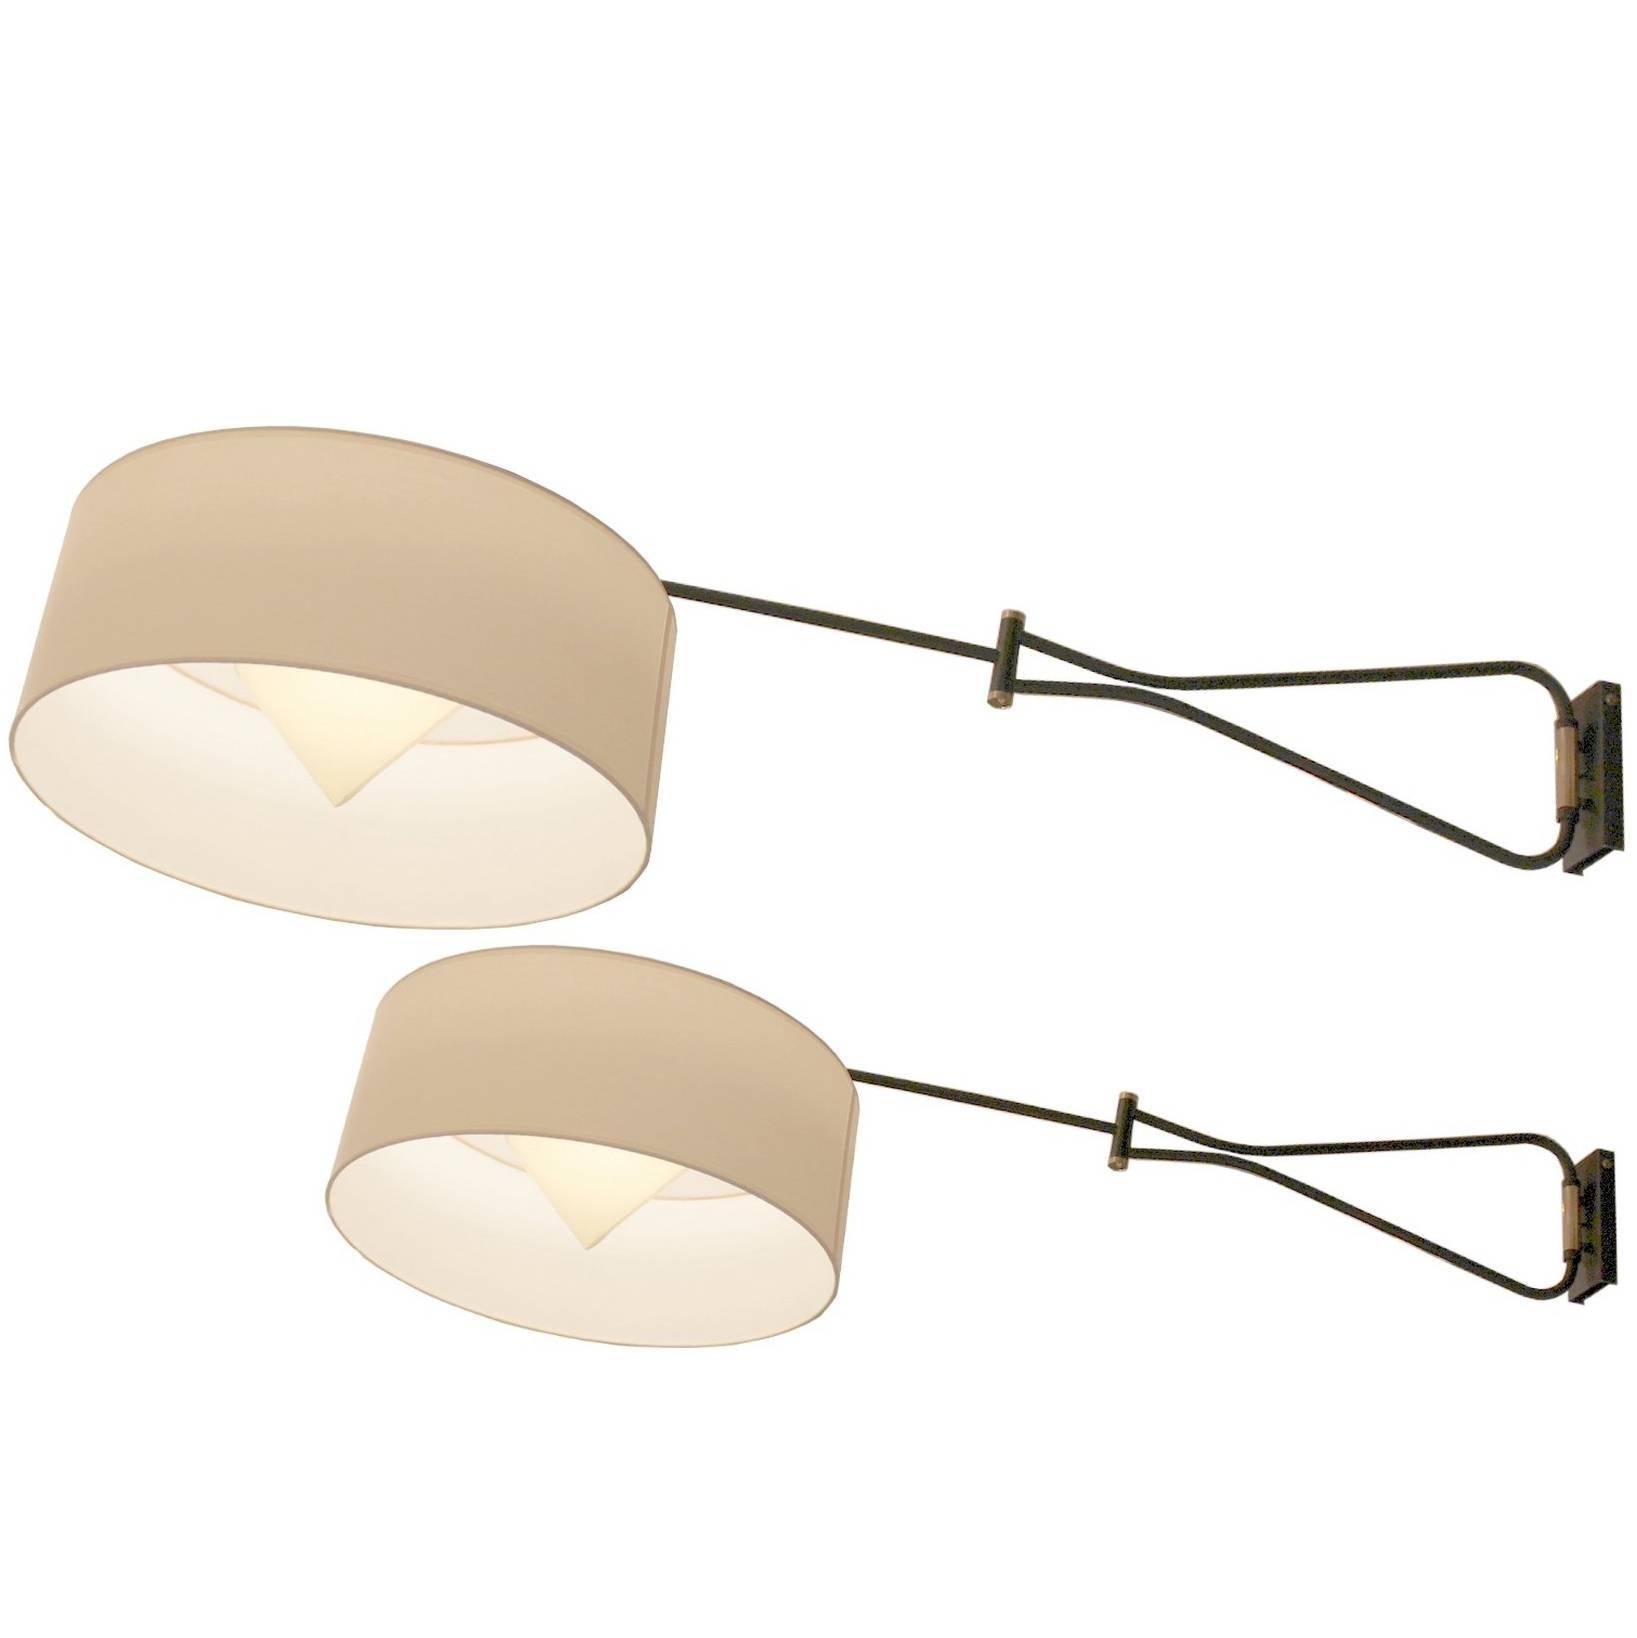 Pair of Adjustable and Foldable Wall Lights Arlus France, circa 1950